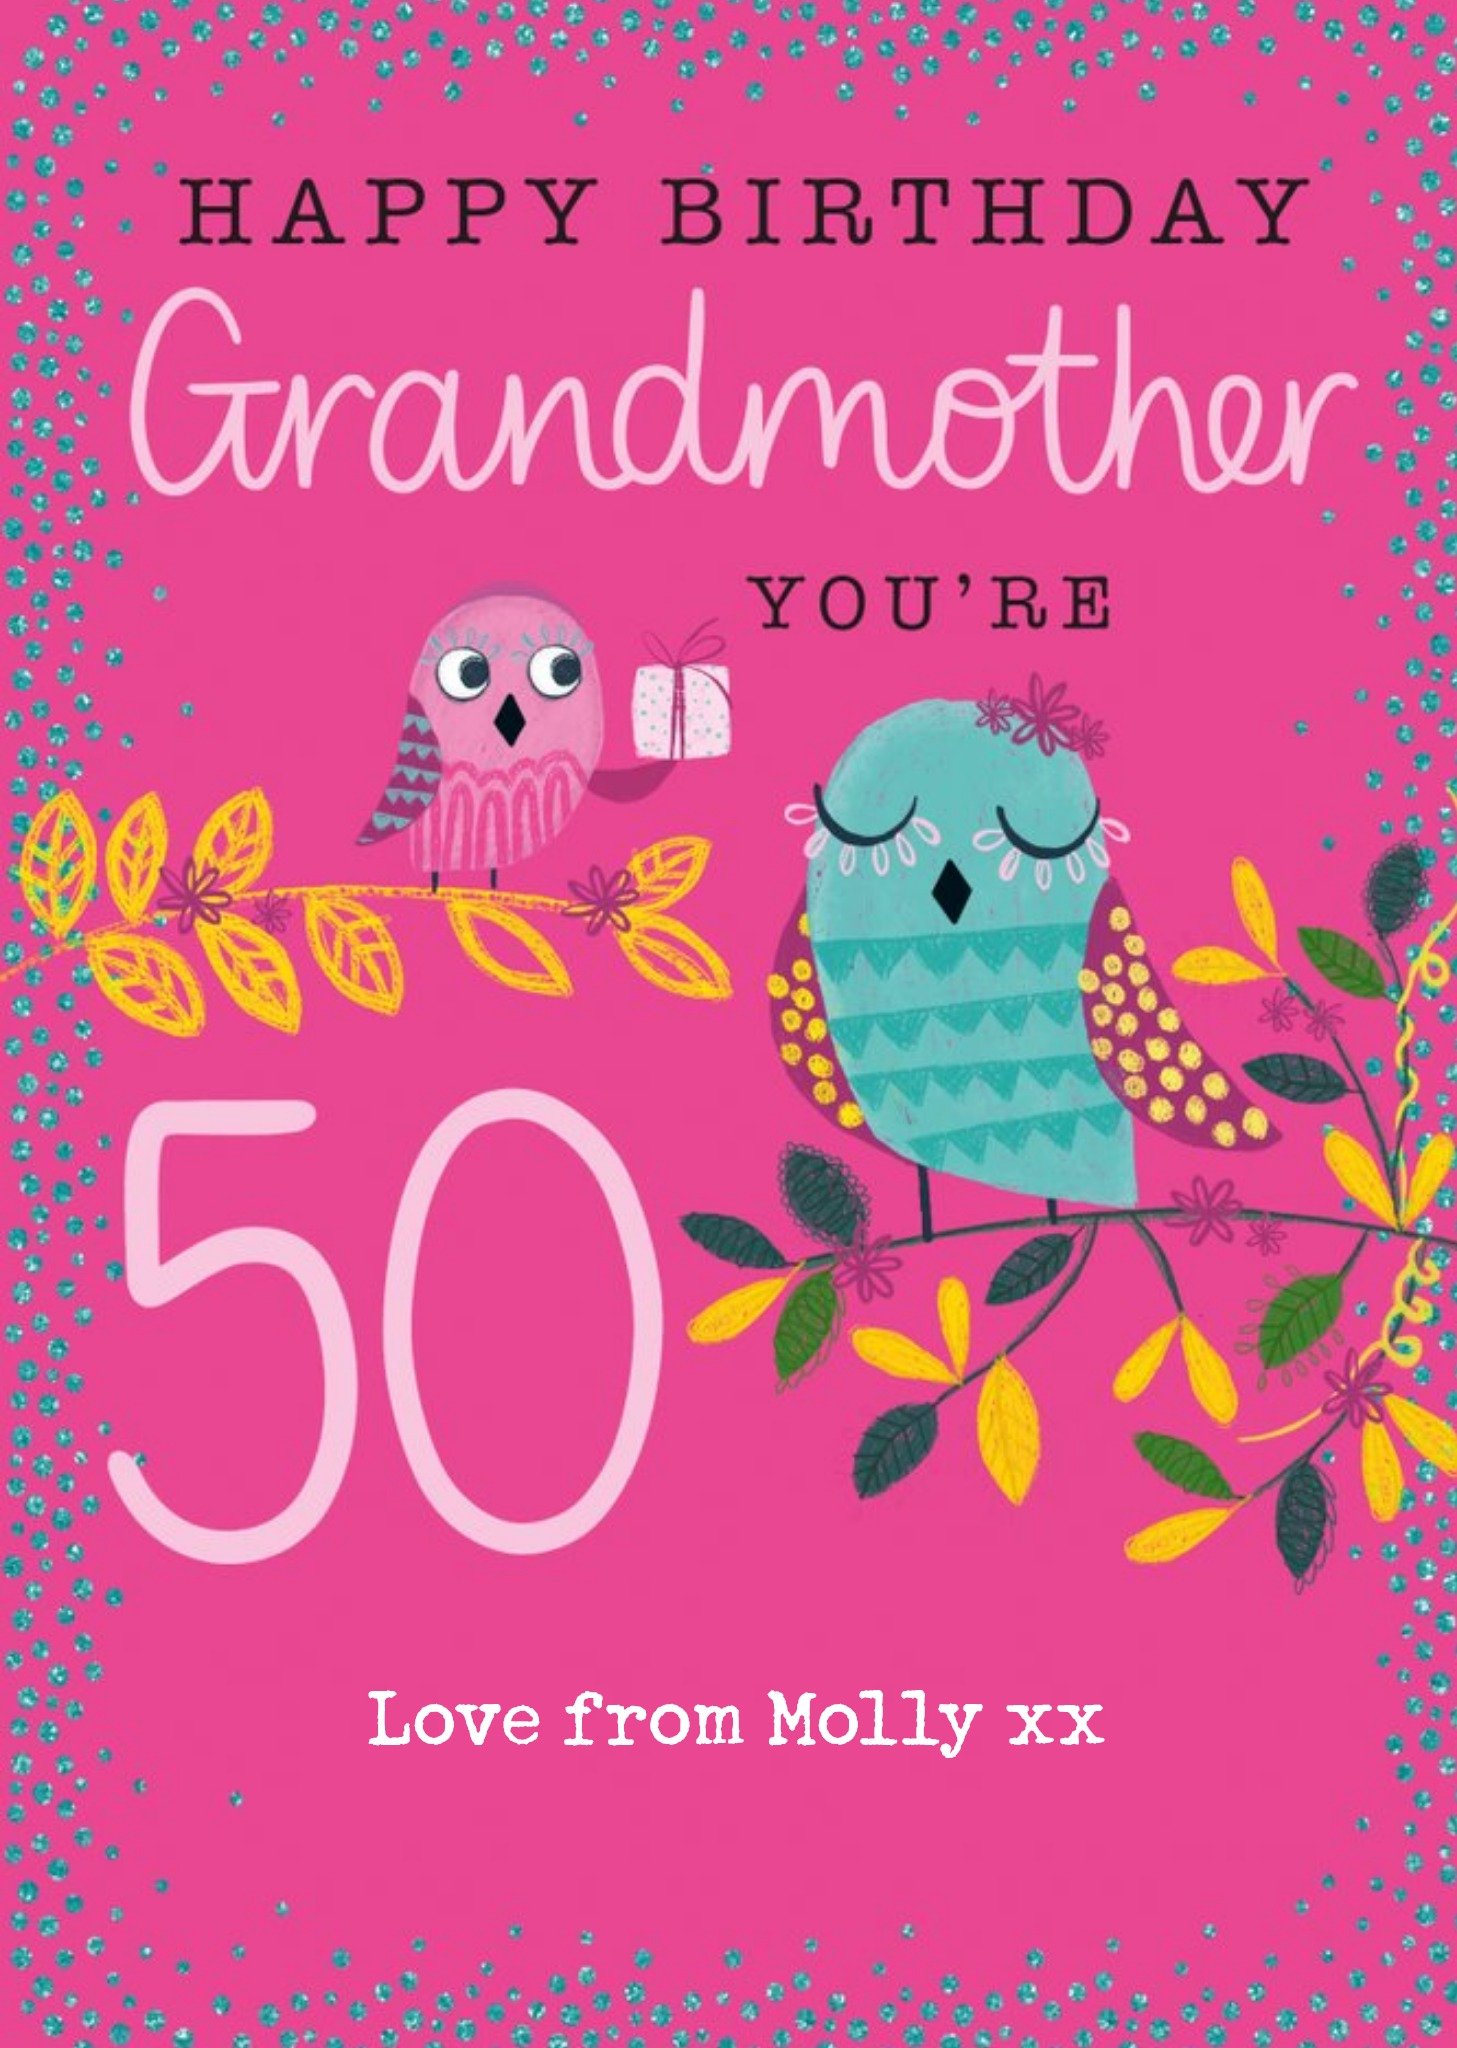 Moonpig Bright Illustration Of Two Owls Happy Birthday Grandmother You're 50 Card Ecard